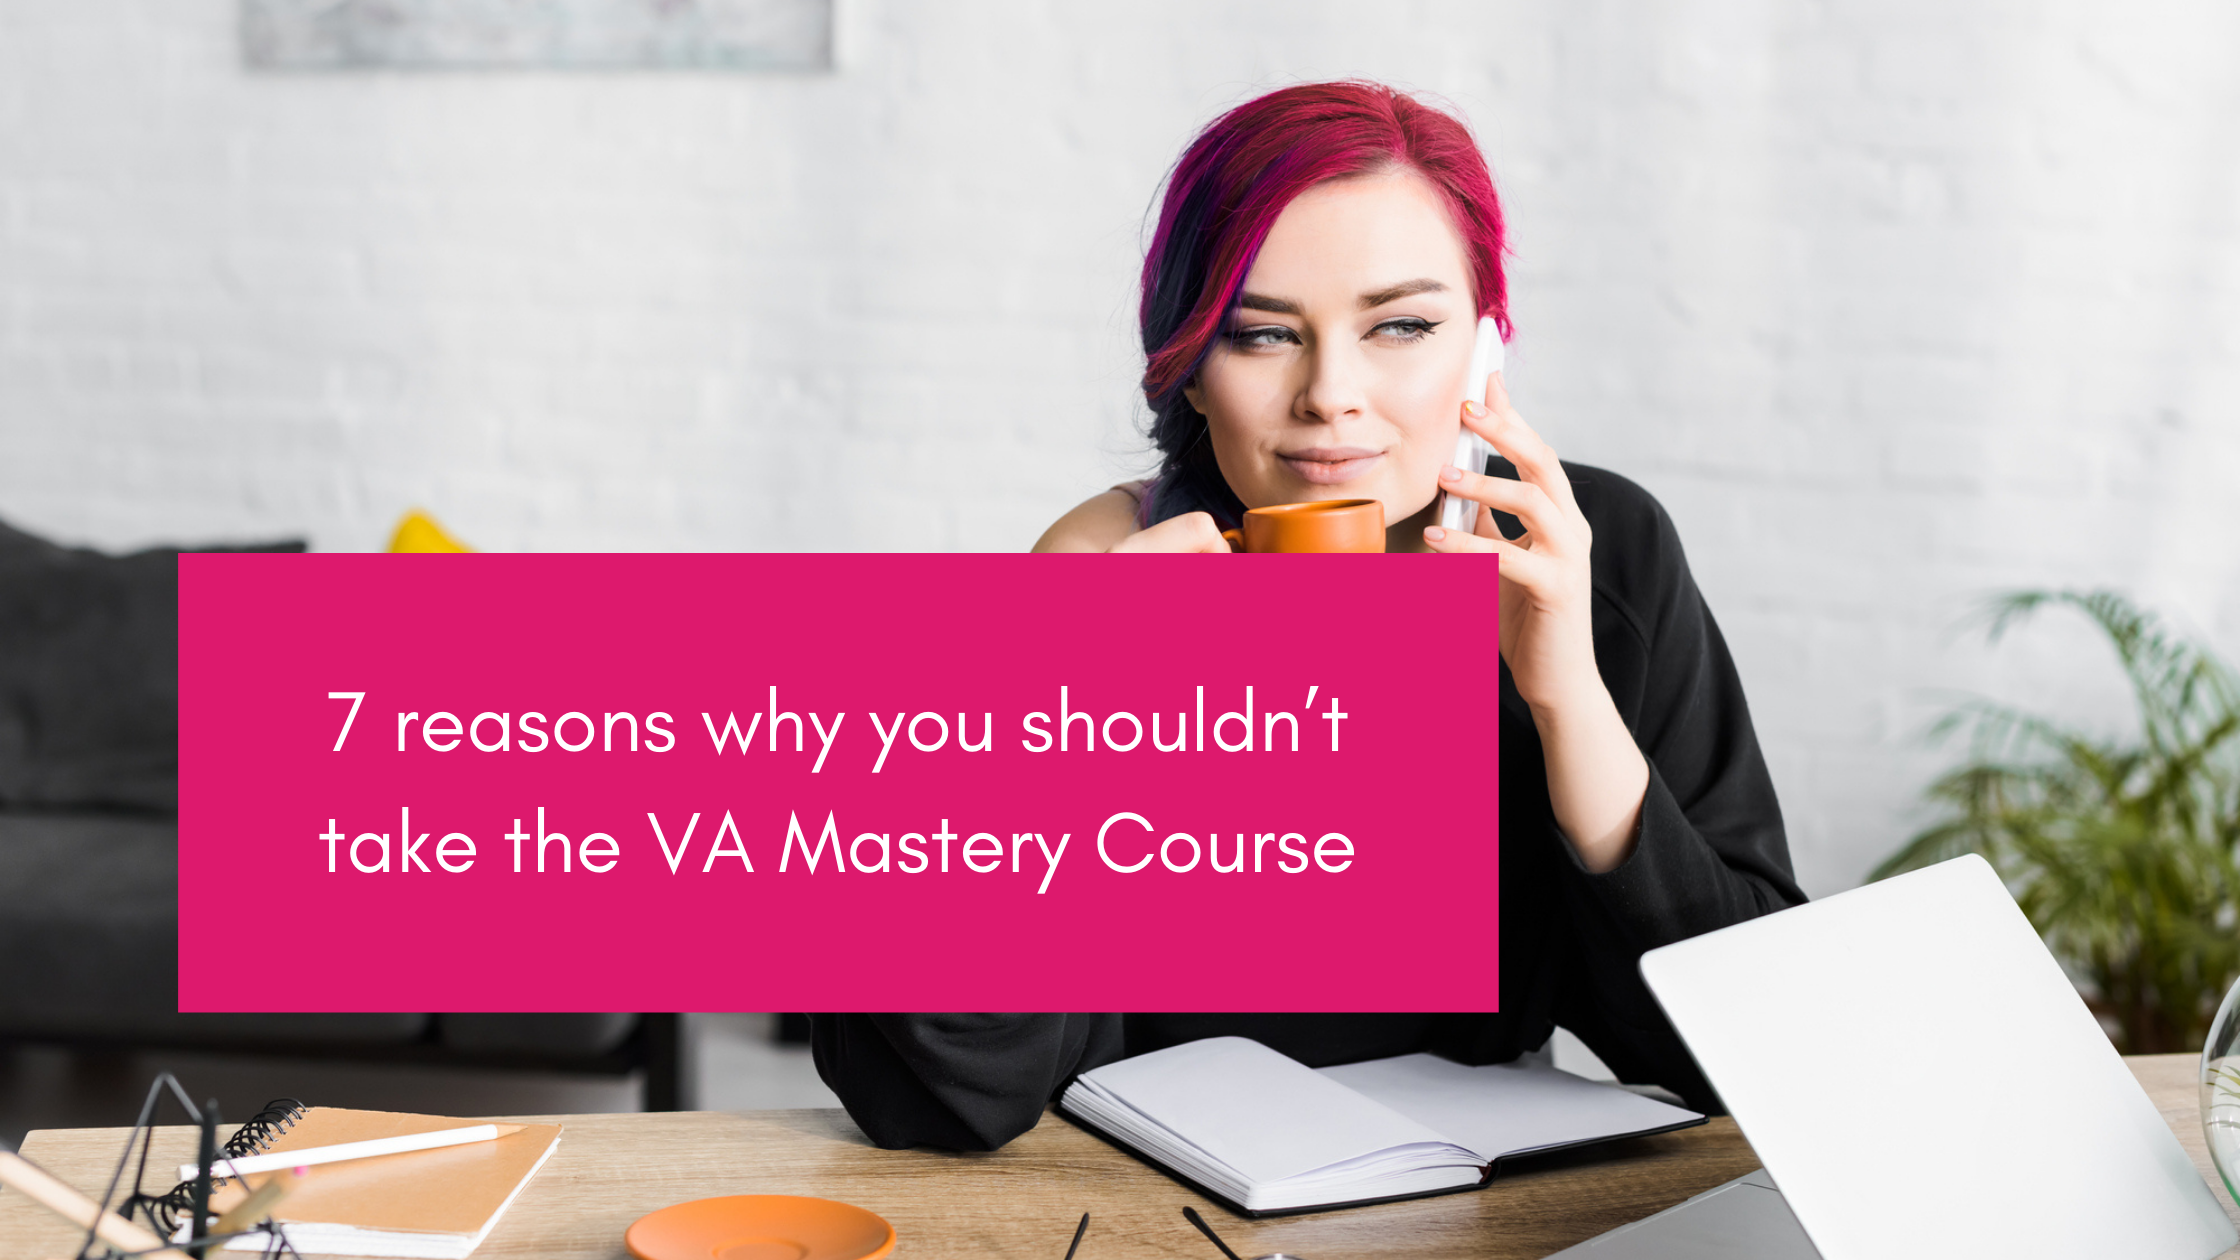 7 reasons why you shouldn’t take the VA Mastery Course